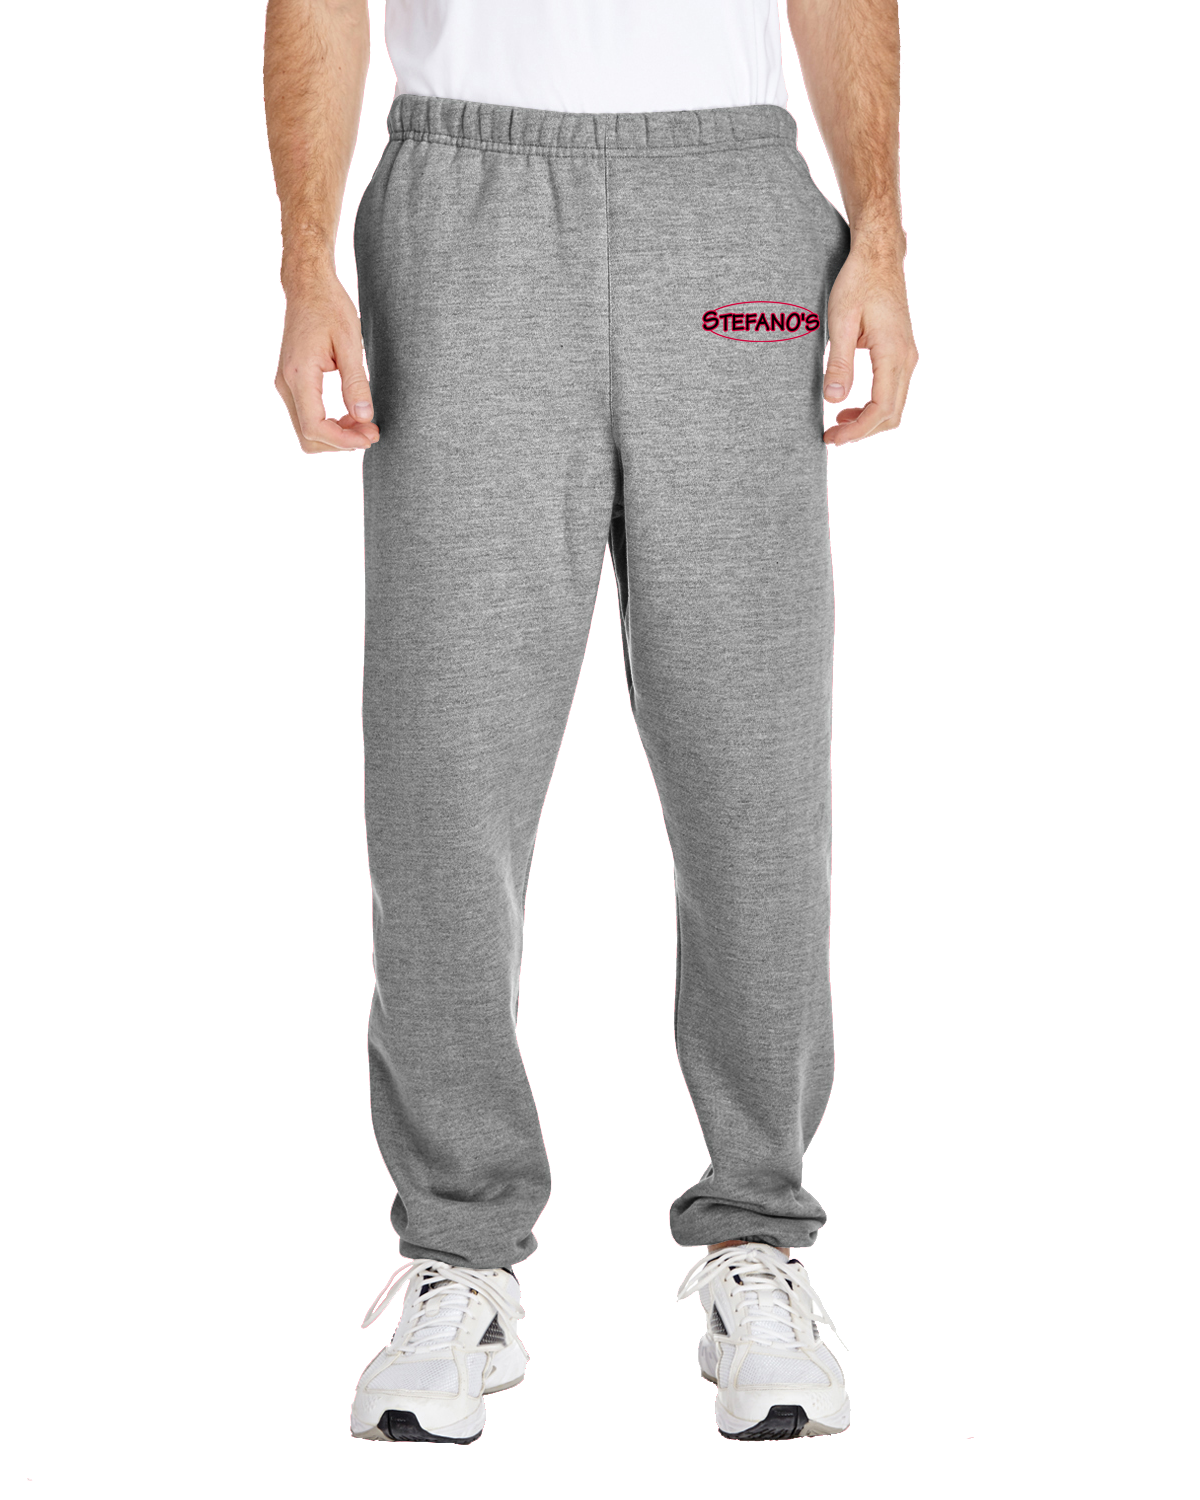 Champion Jogger - Grey | Stefano's Landscaping